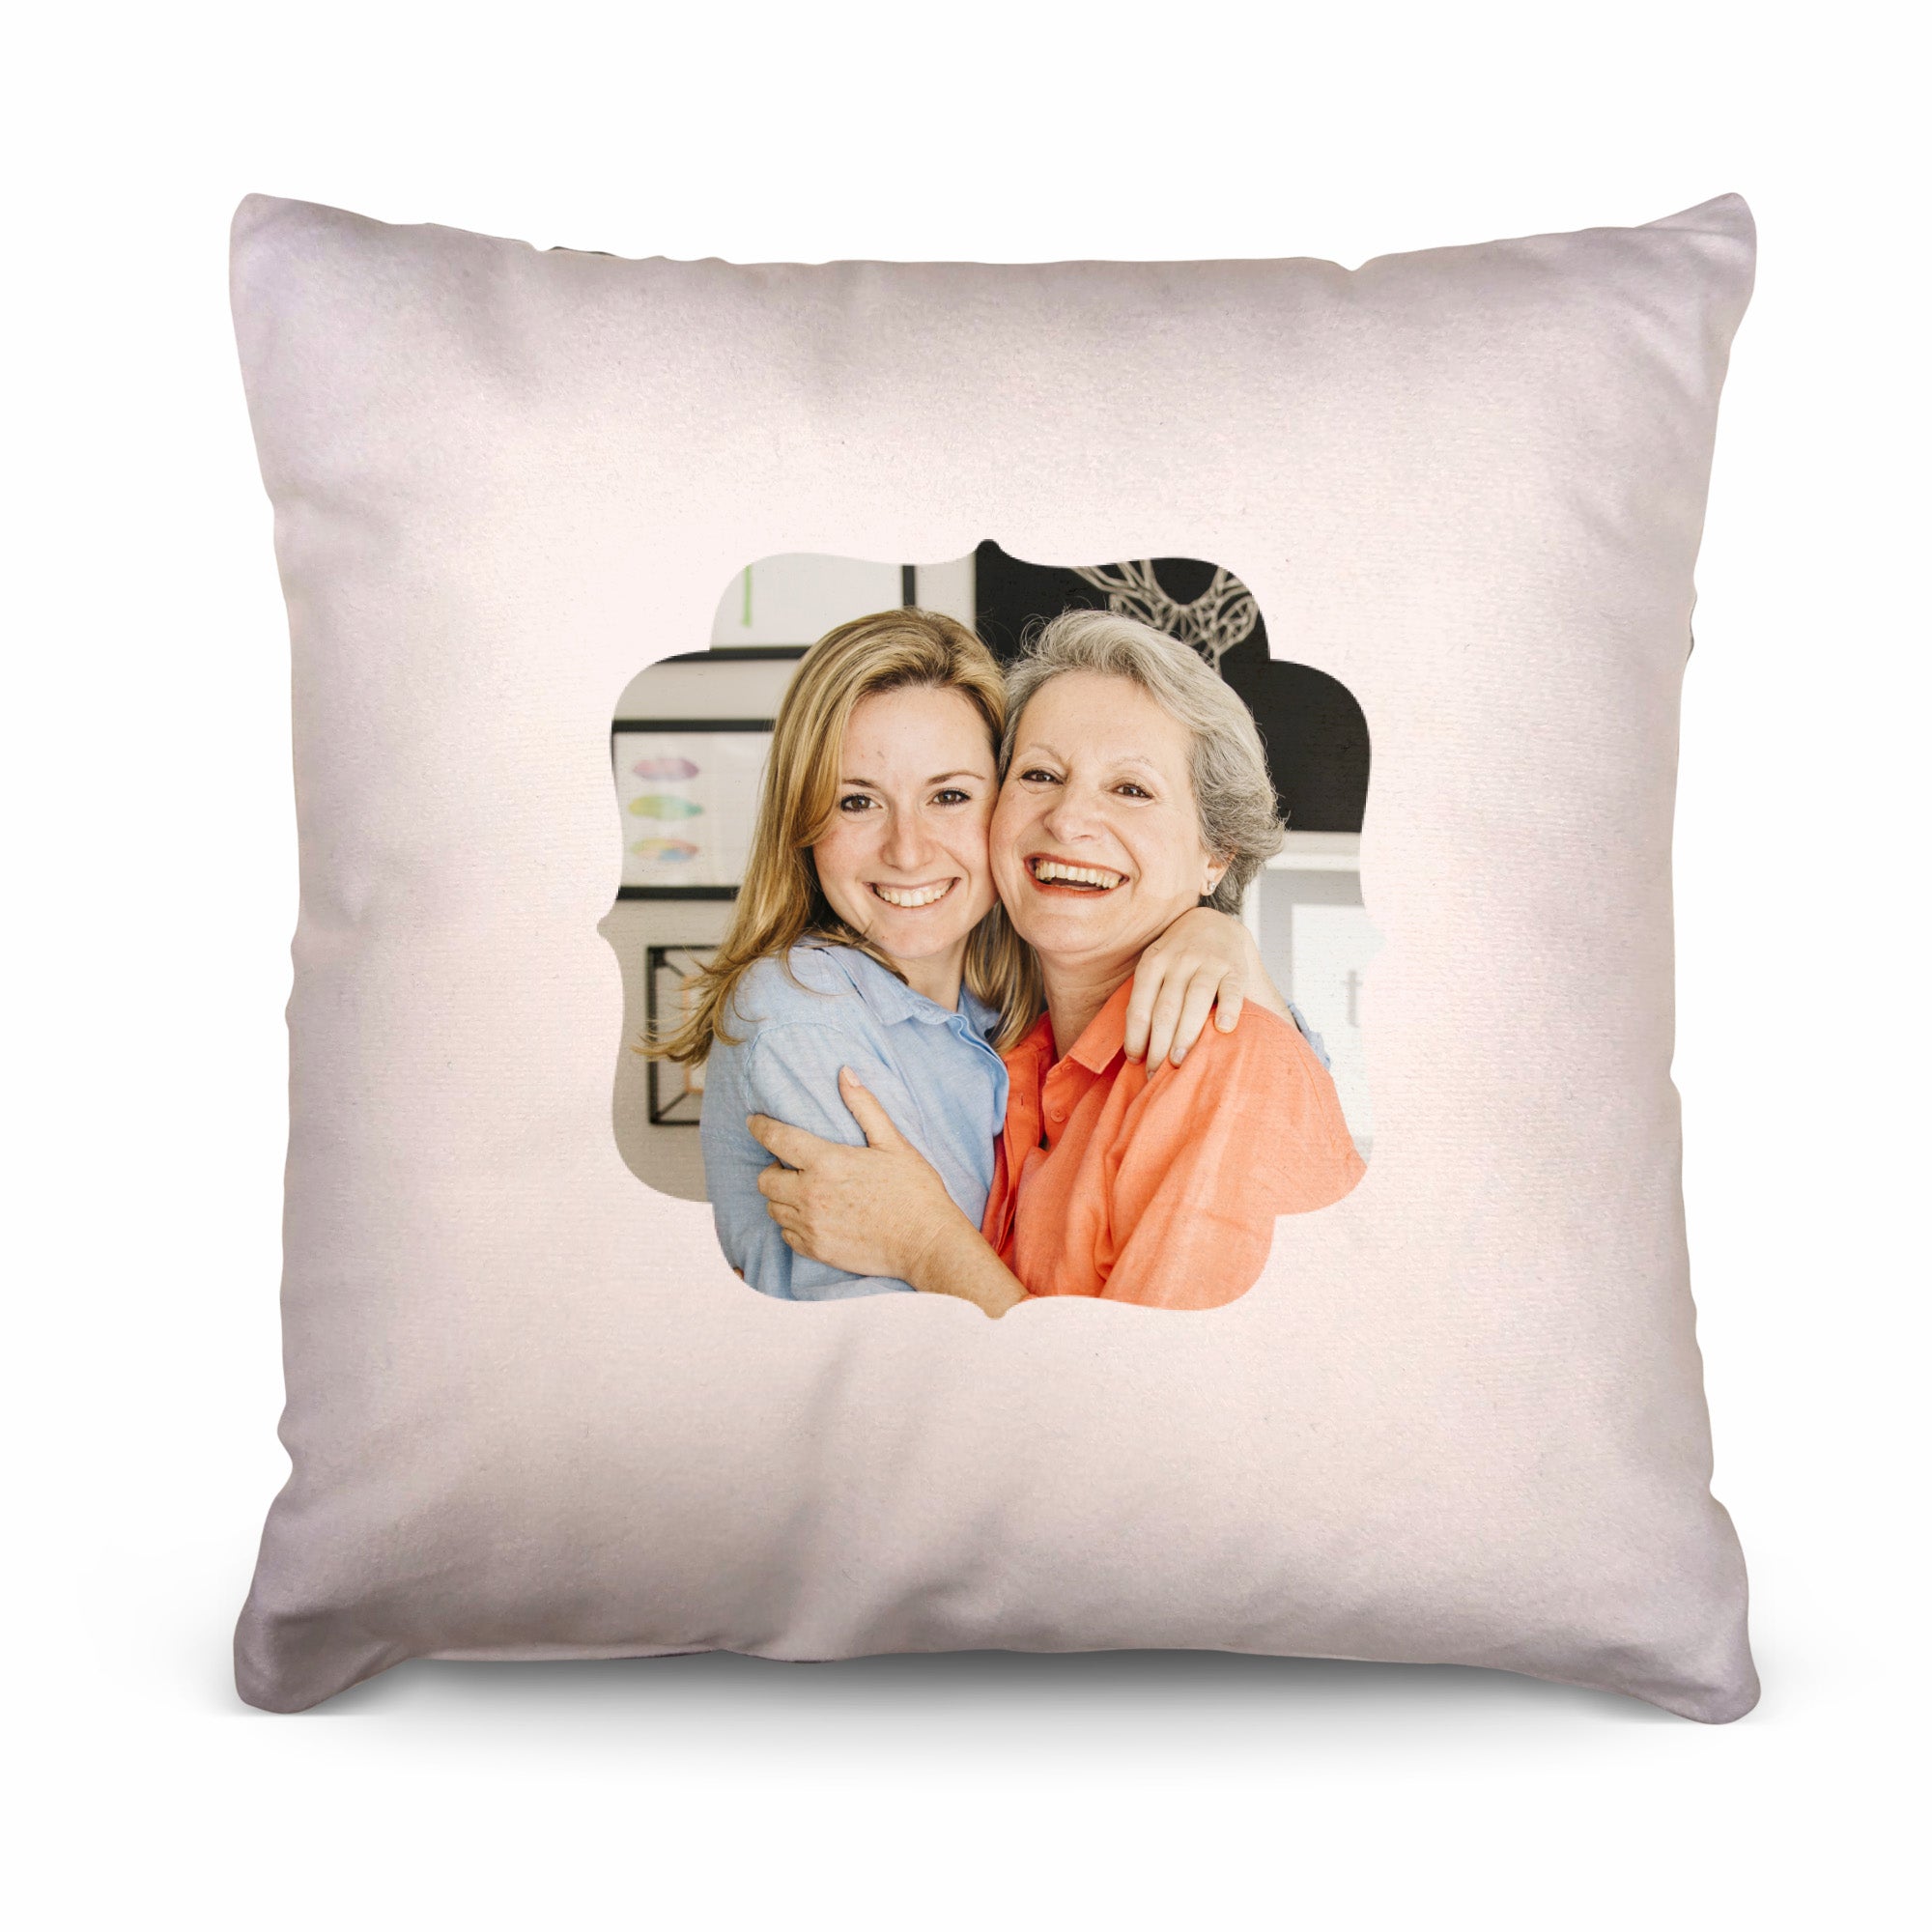 A Hug From - Pink - 26cm x 26cm - Personalised Cushion